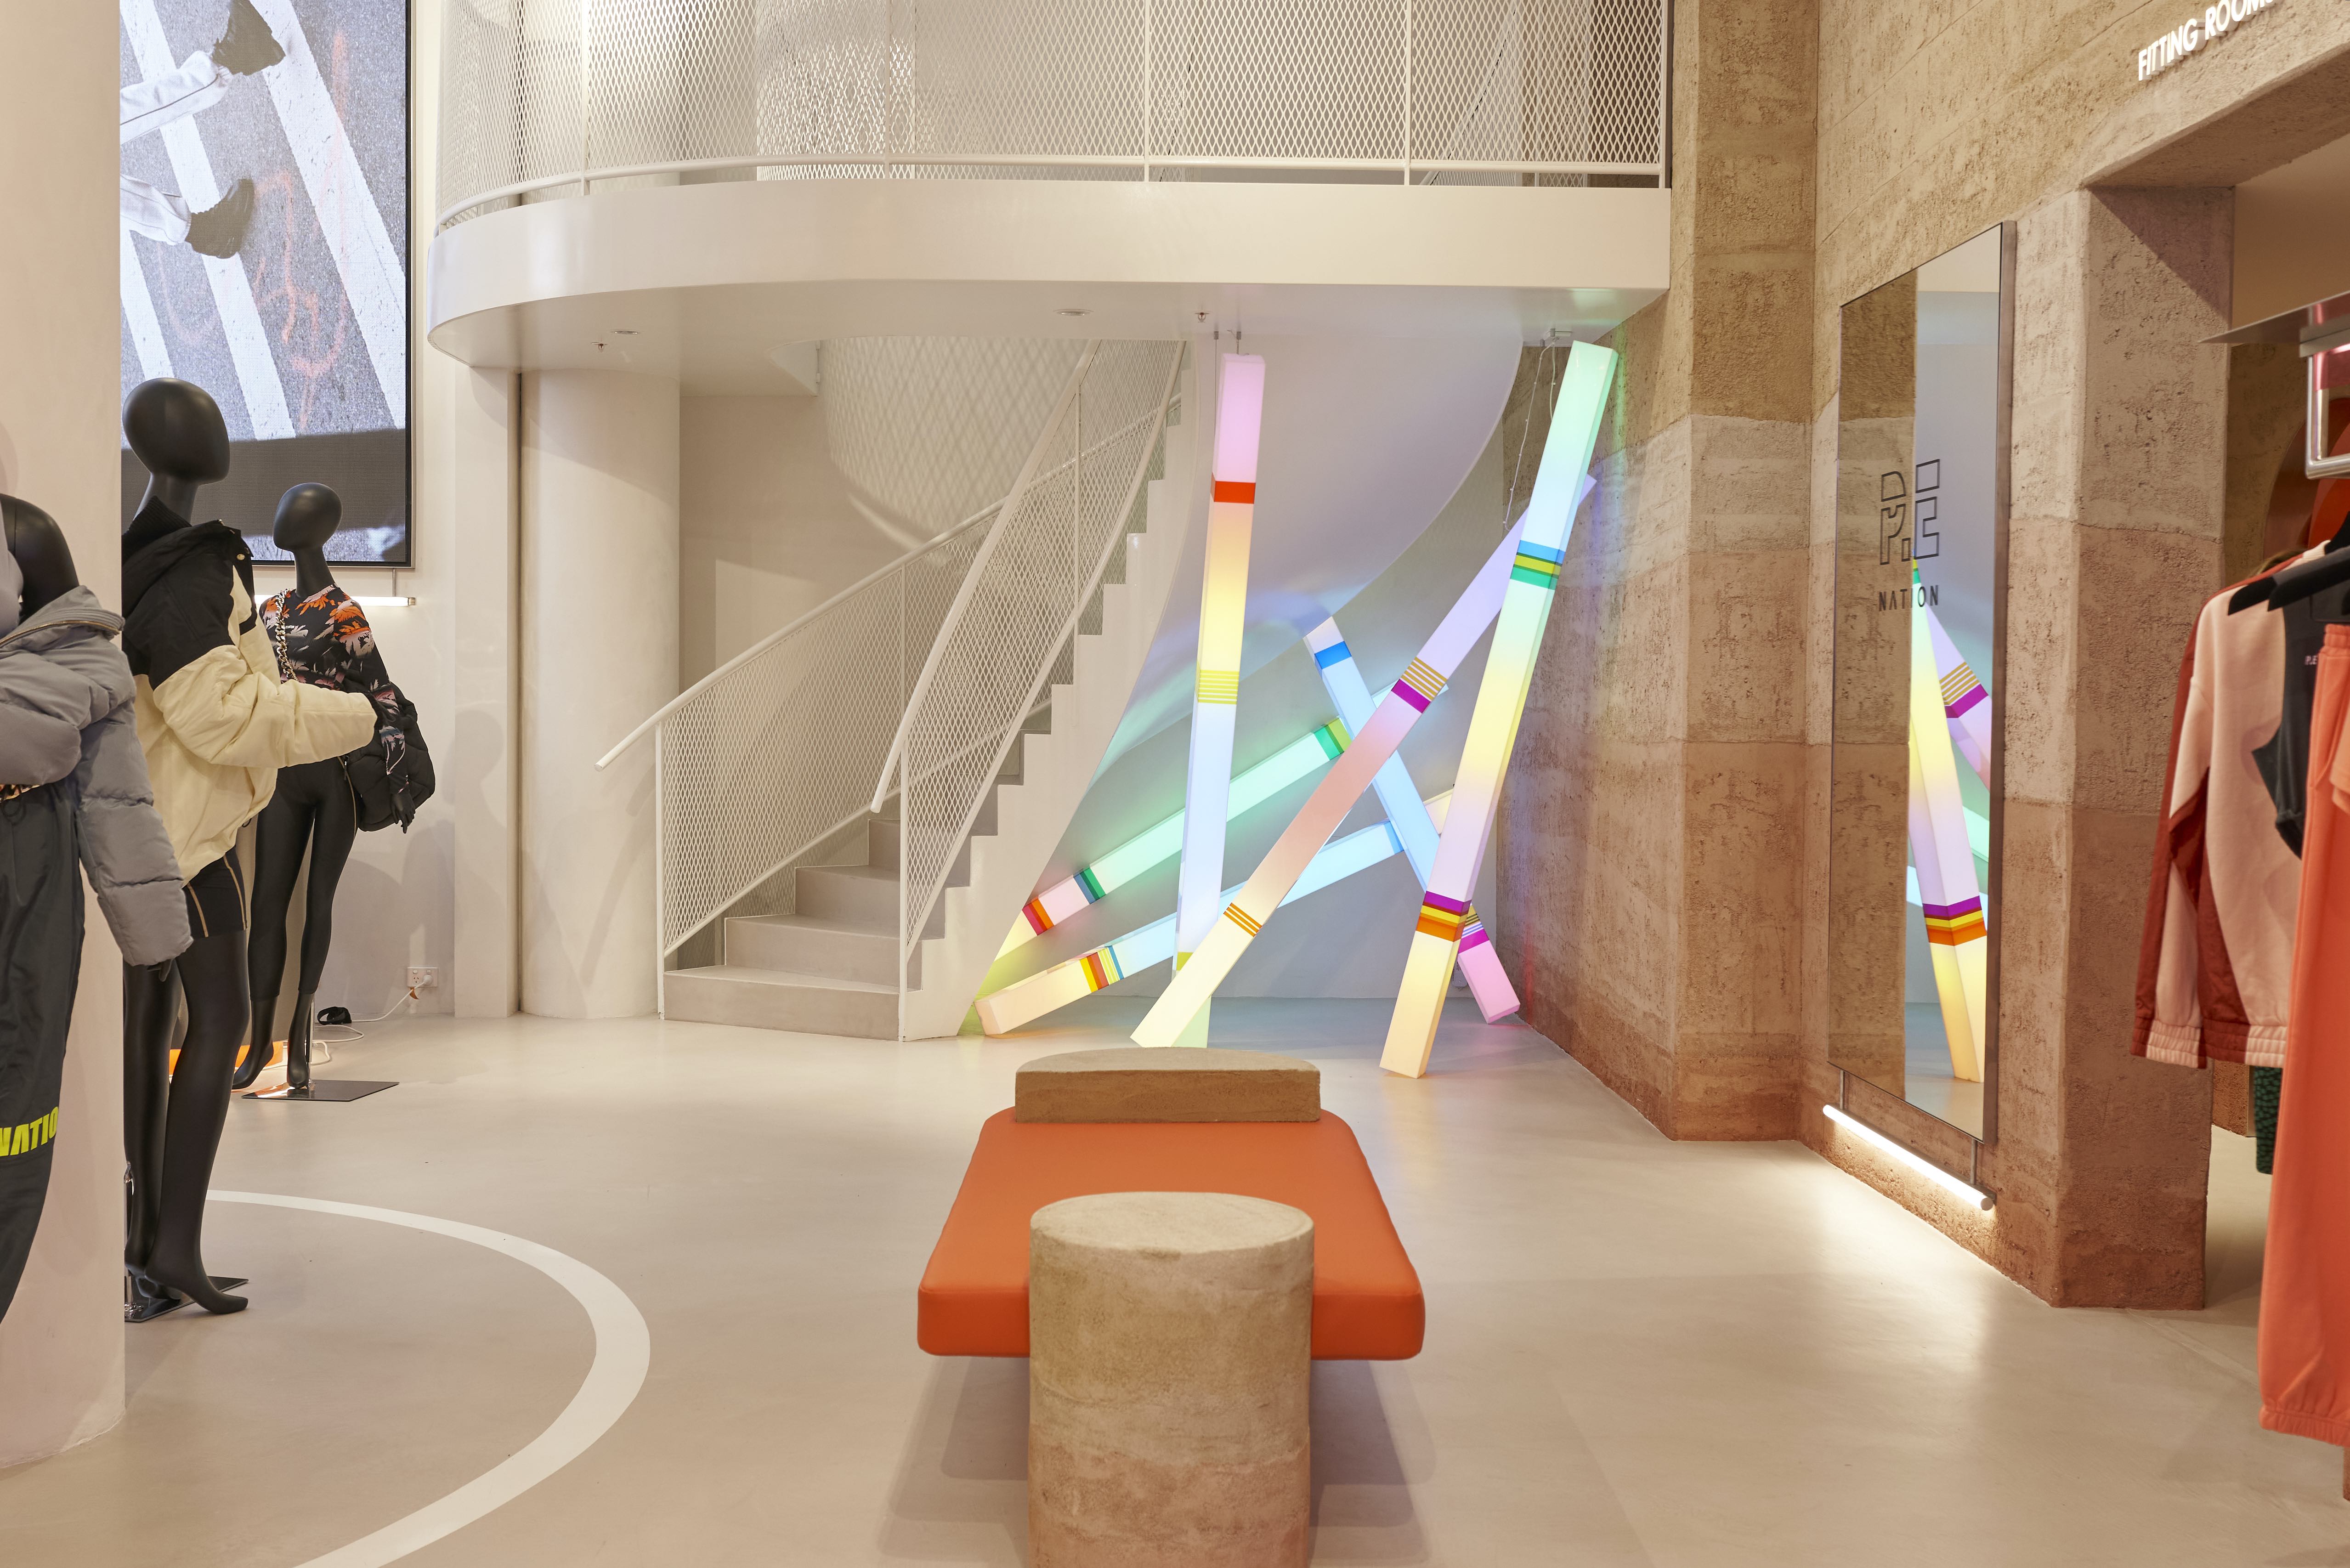 Activewear Label PE Nation Opens Its First Global Flagship Store in  Sydney's CBD (Complete With Light Installations)